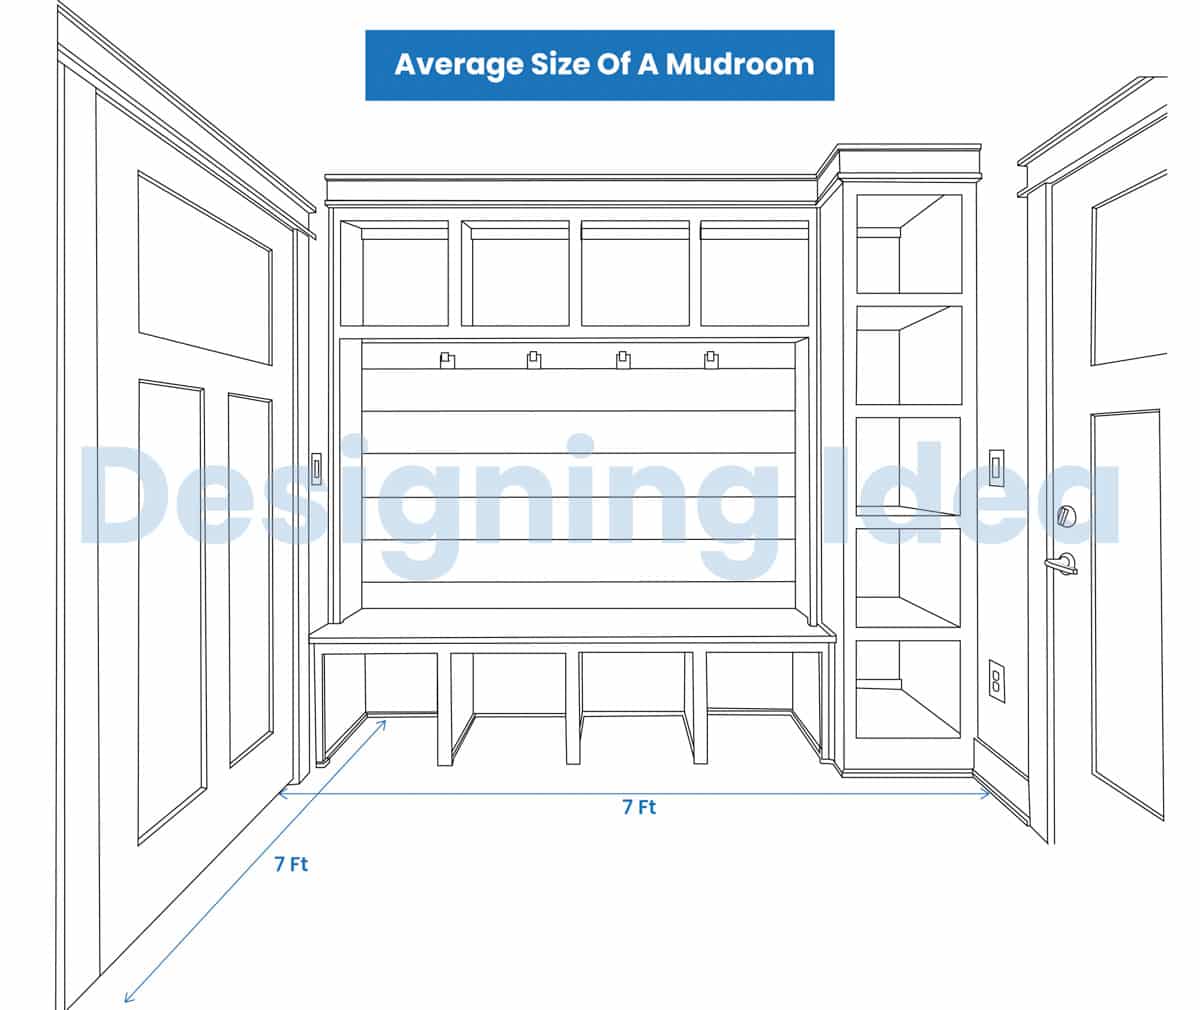 Average Size Of A Mudroom